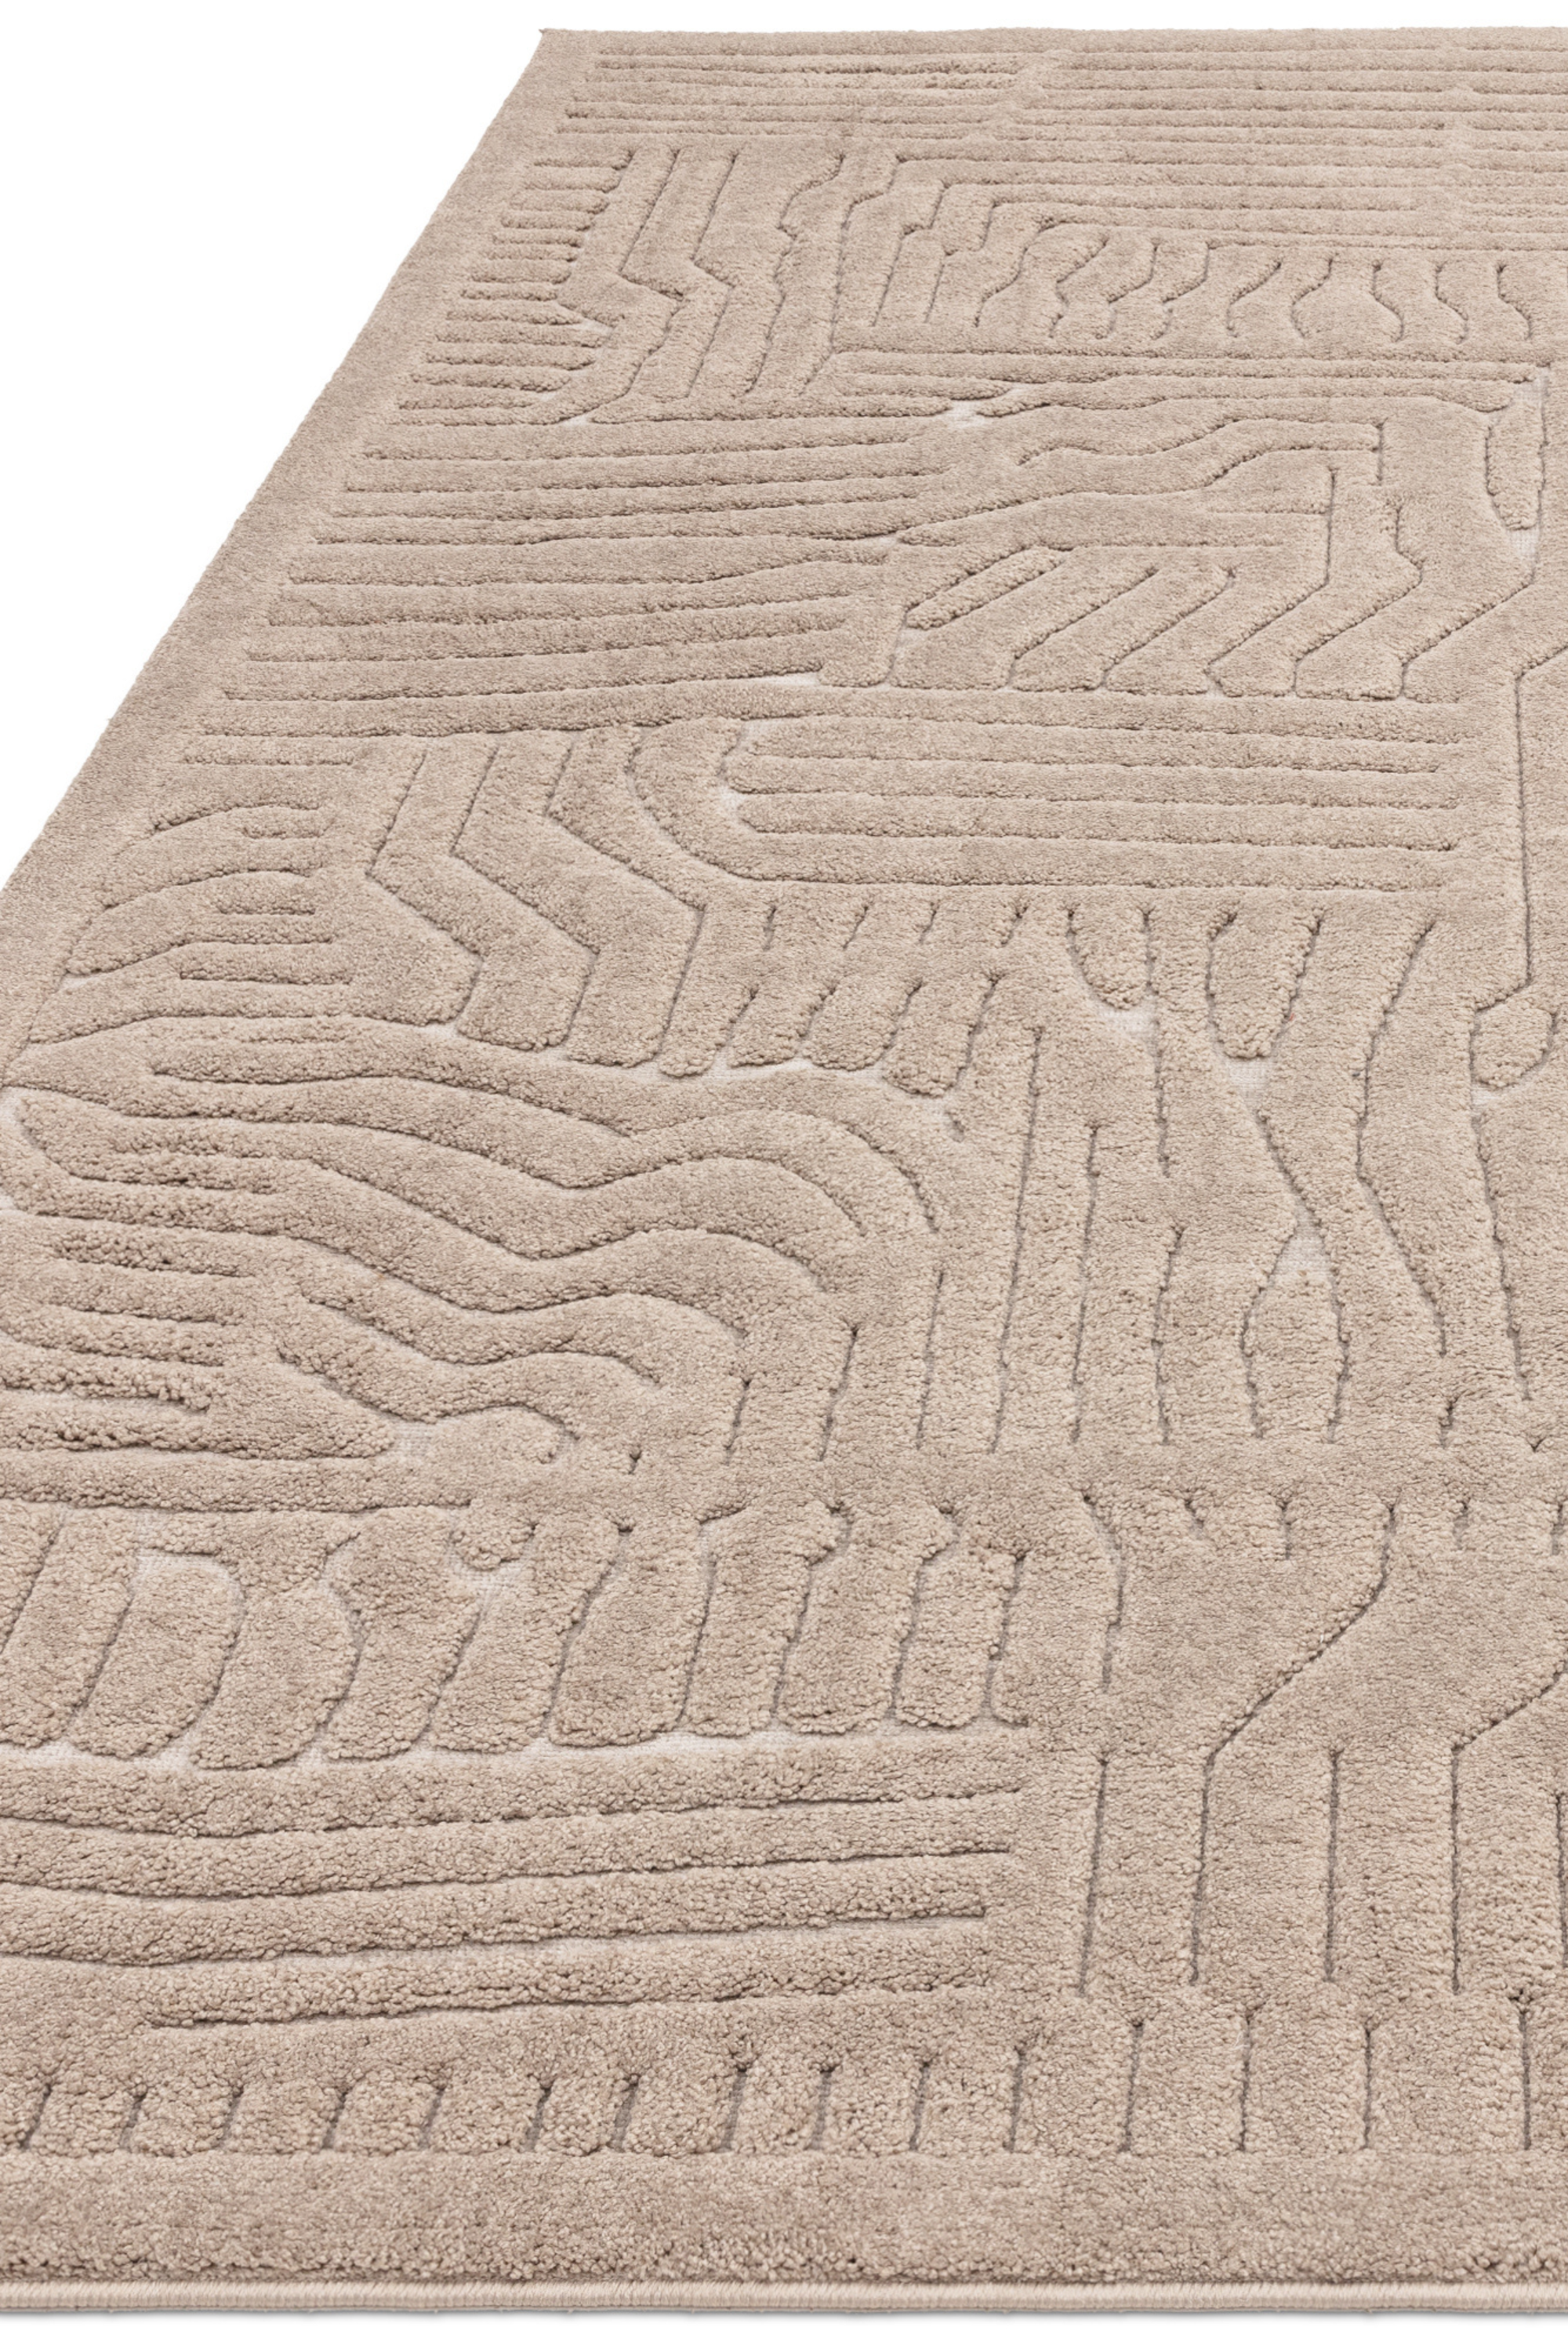 Beige rug with high-low pile and minimal geometric pattern 